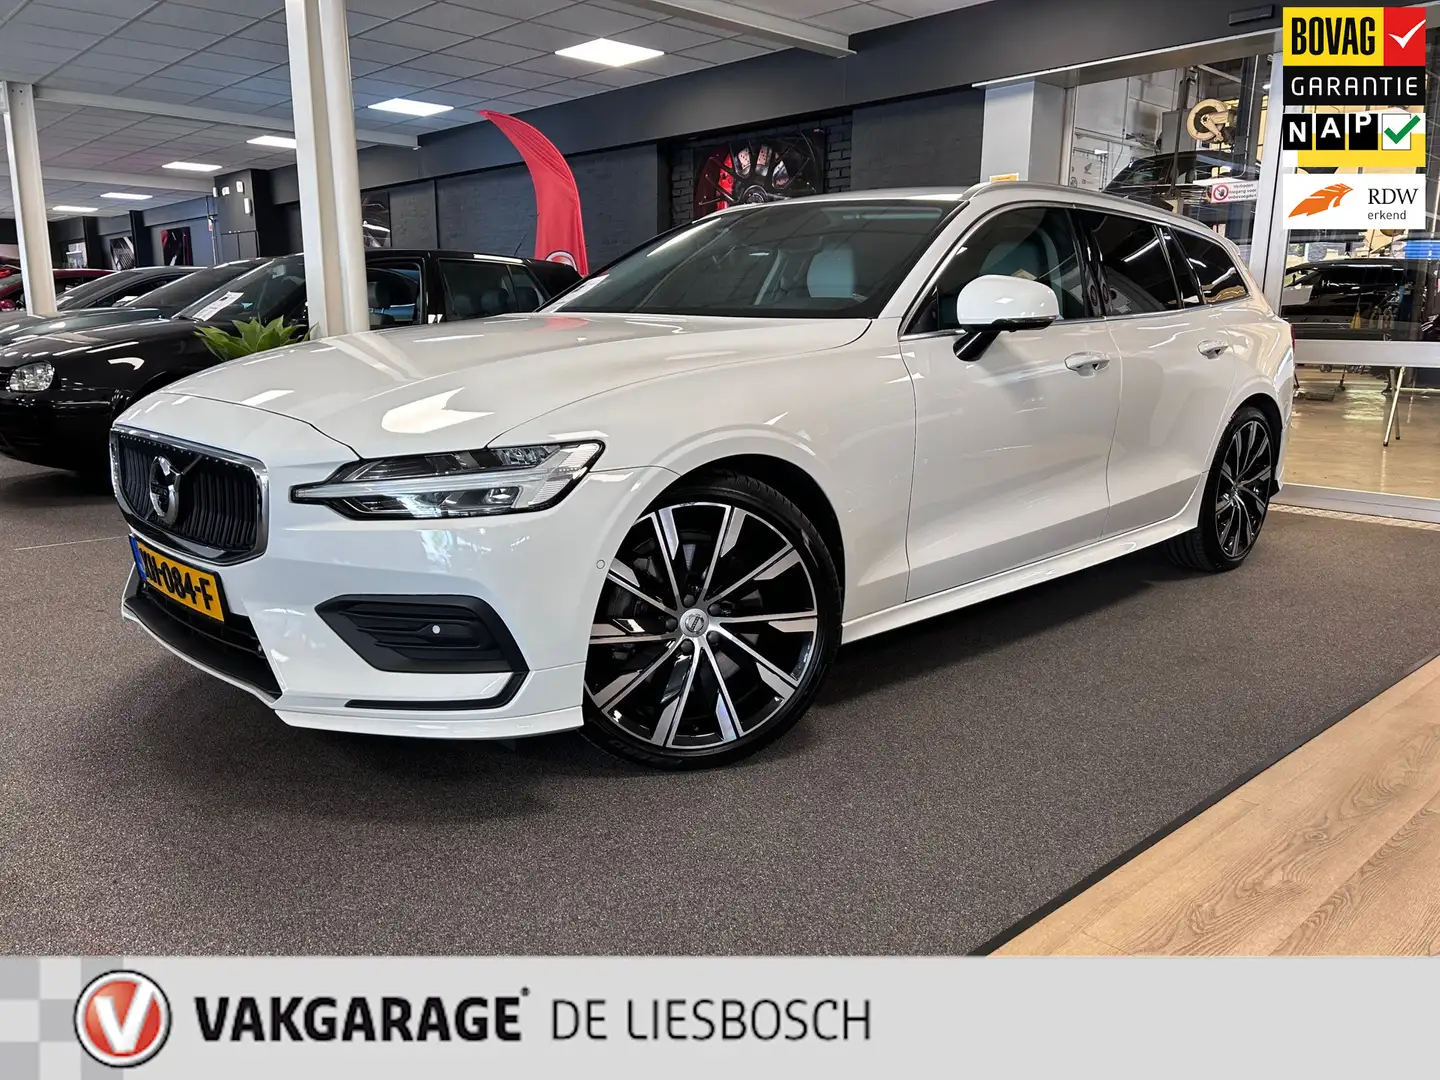 Volvo V60 2.0 T5 Momentum/Styling kit/Automaat/Led/20inch/36 Bianco - 1